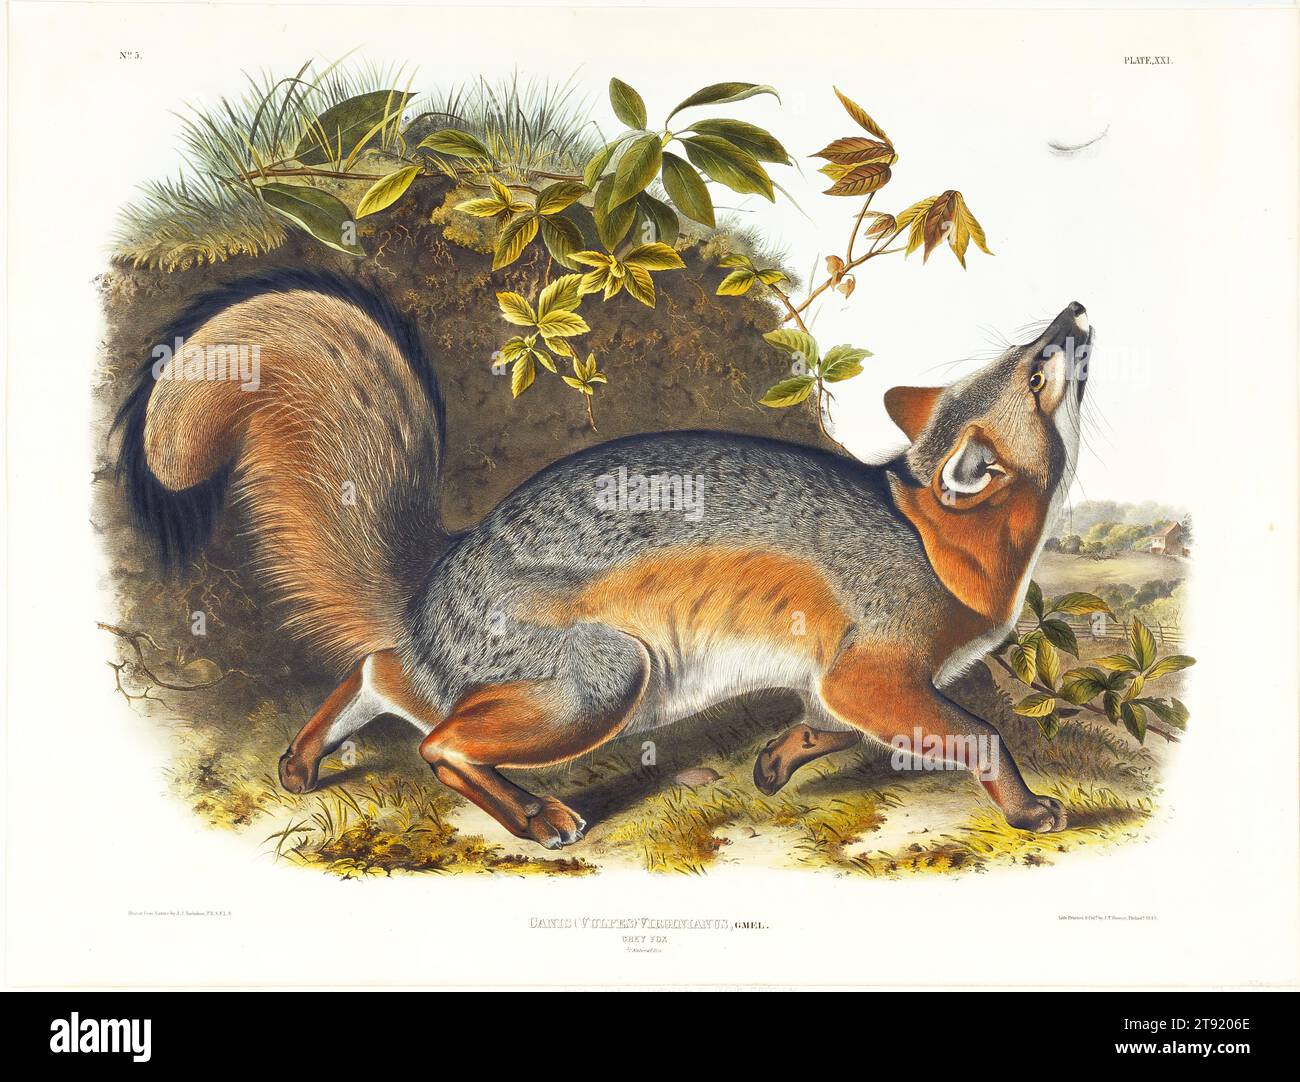 Grey Fox, 1845, after John James Audubon; Lithographer: John T. Bowen; Printer: John T. Bowen, American (born Saint-Domingue, now Haiti), American (born Saint-Domingue, now Haiti), 1785-1851, 19 1/2 x 23 1/2 in. (49.53 x 59.69 cm) (image), Hand-colored lithograph, United States, 19th century Stock Photo